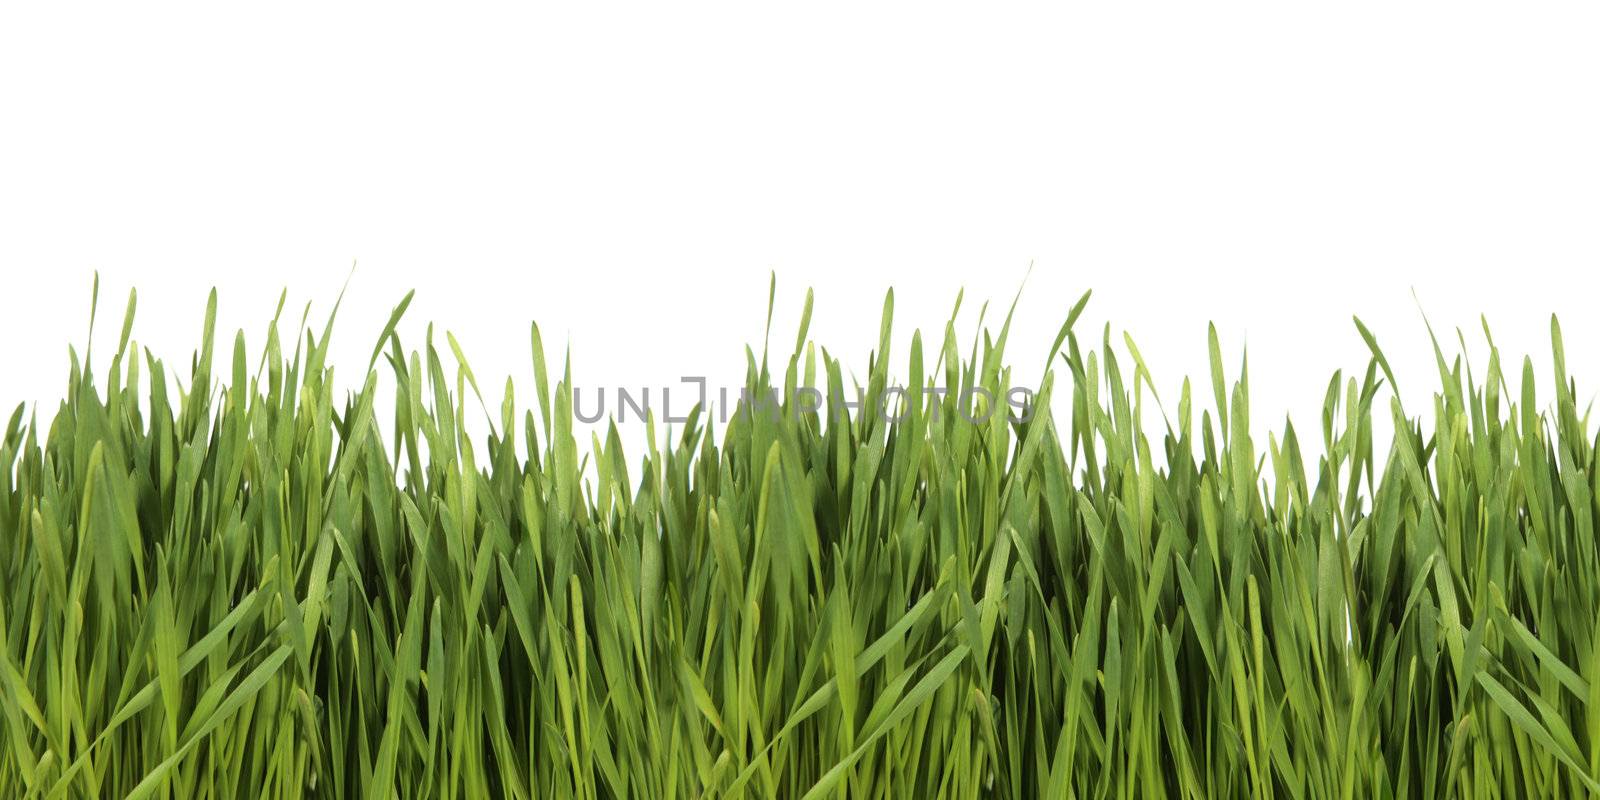 Isolated Fresh Green Grass on White Background